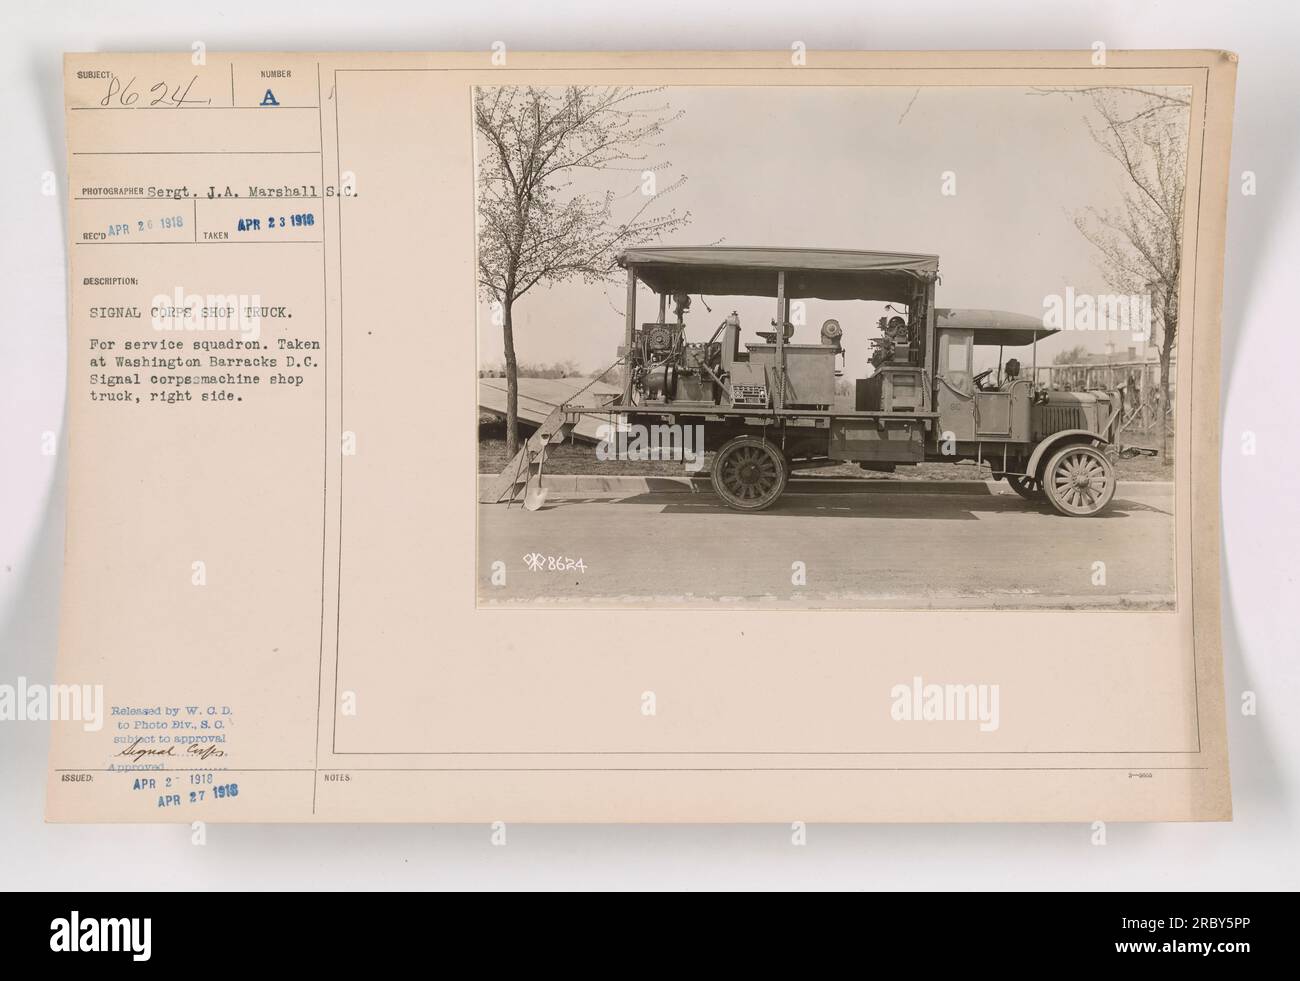 One of the photographs in the series, labeled 111-SC-8624, shows a Signal Corps shop truck being operated by a service squadron at Washington Barracks, D.C. The photo was taken on April 23, 1918, by Sergeant J.A. Marshall. It depicts the right side of the machine shop truck, which is marked with the Signal Corps logo. The details mentioned in the notes include a reference number, timestamps, and approval signatures. Stock Photo